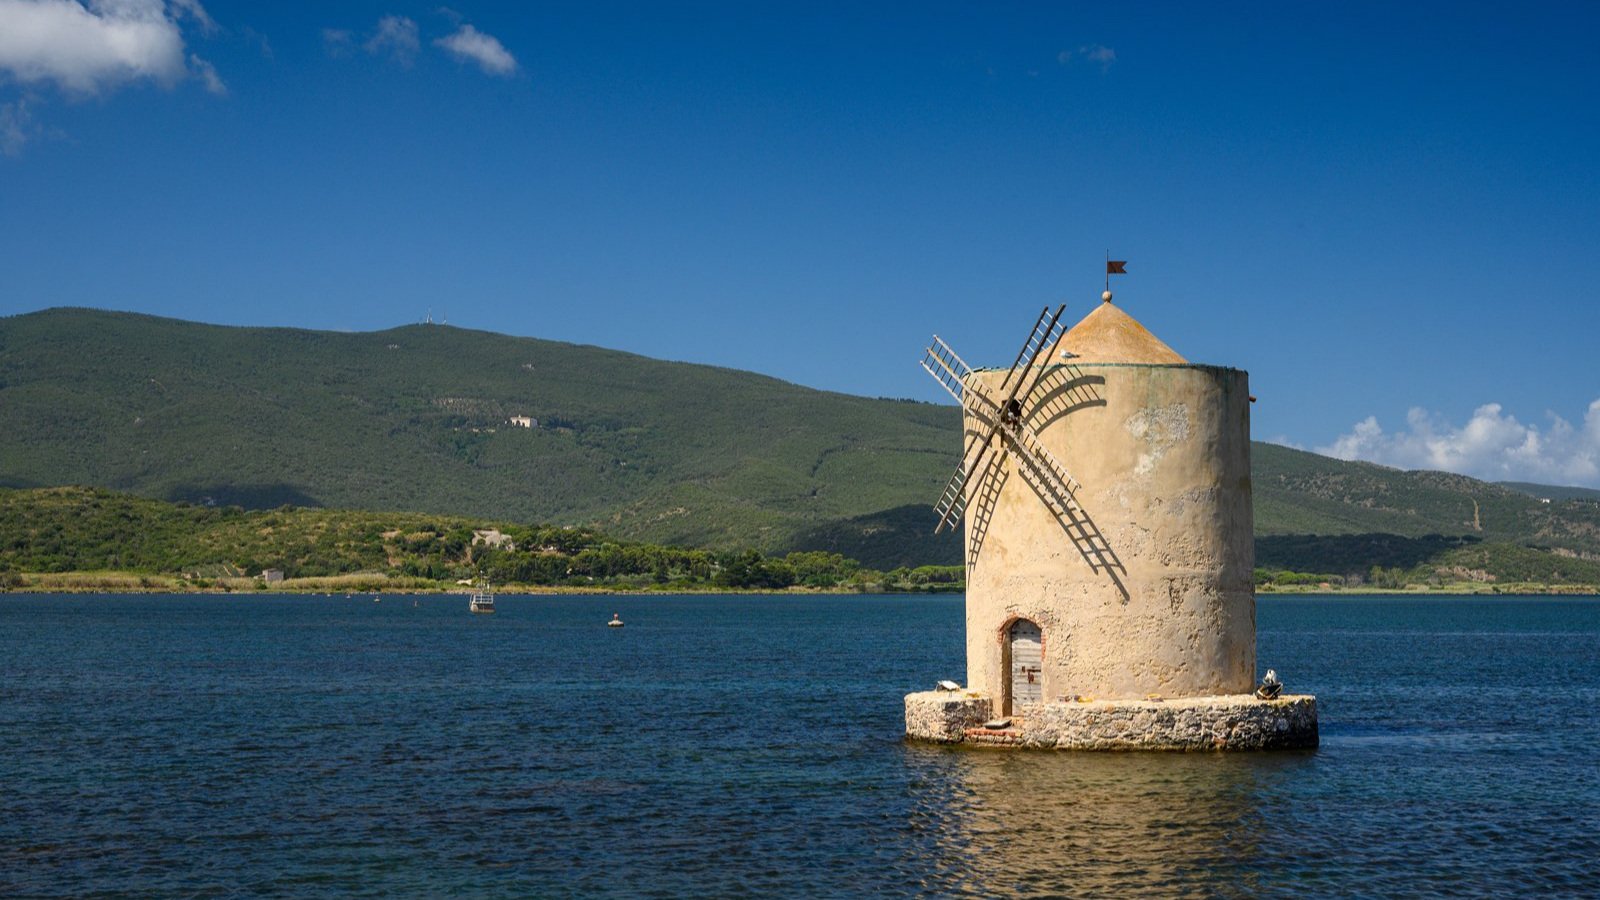 Windmills and nature preserves in Maremma, a scenic and less-known region of Tuscany